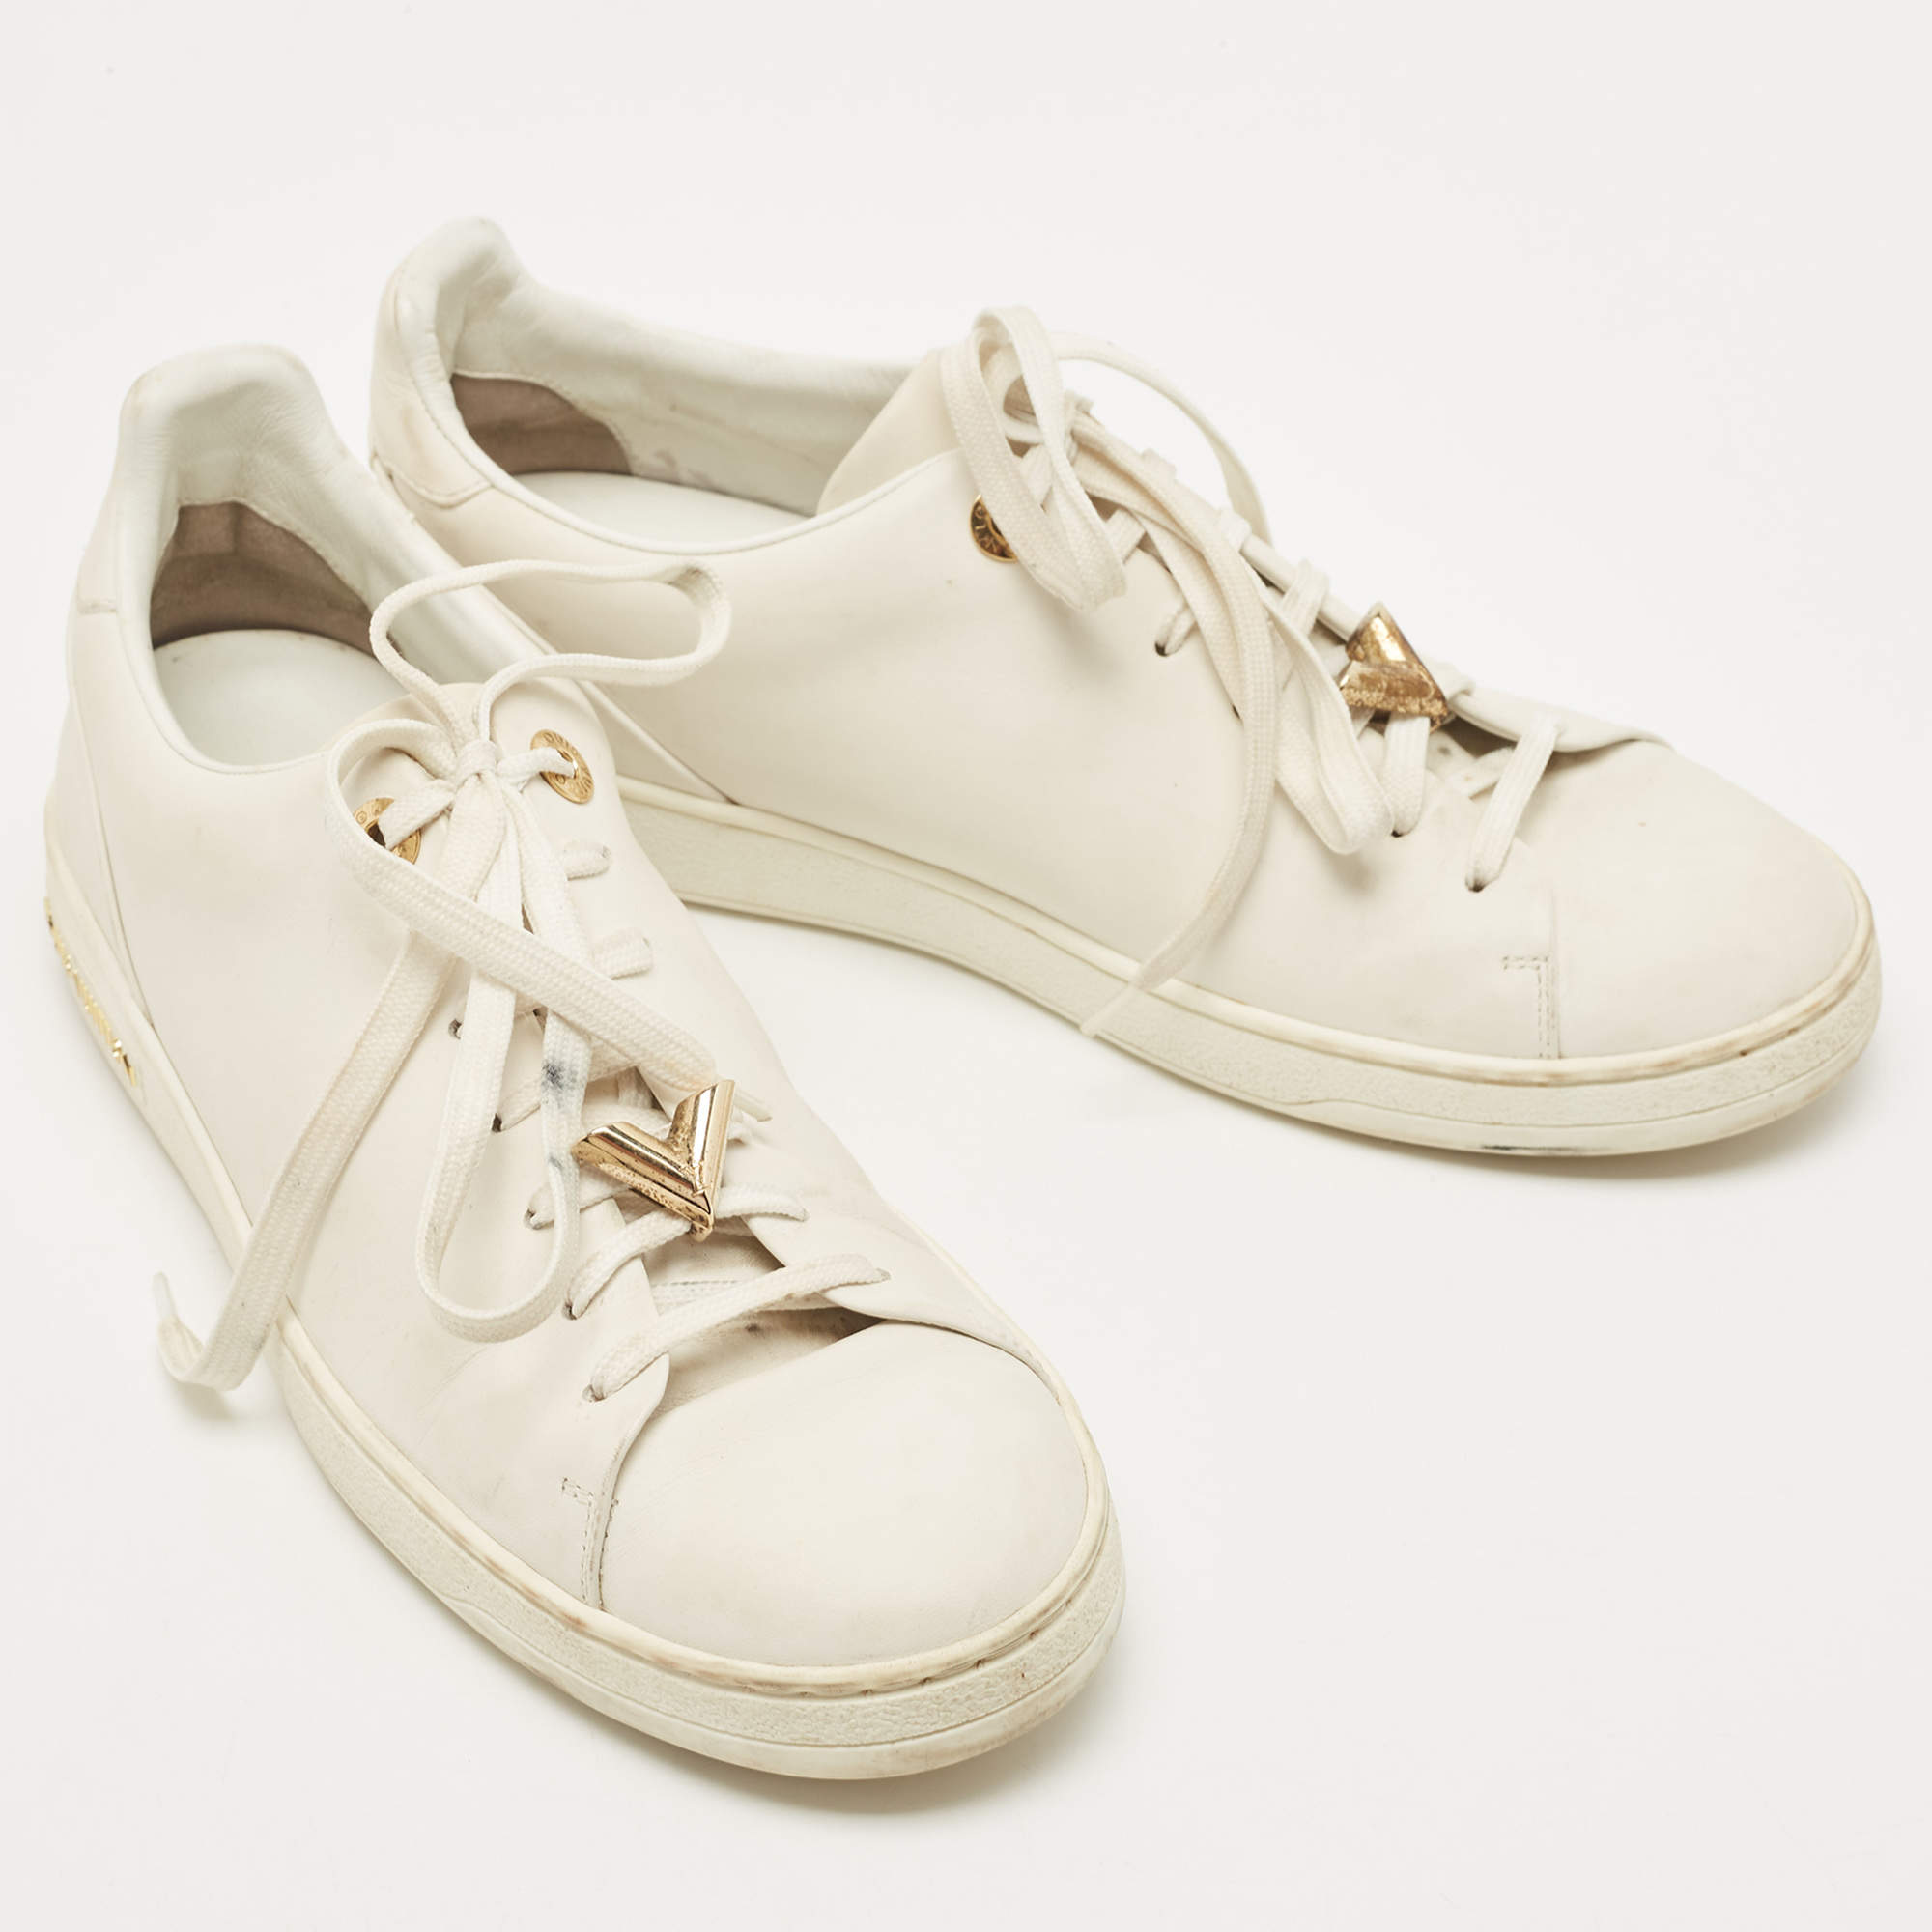 Sneakers Louis Vuitton LV FRONTROW Trainer